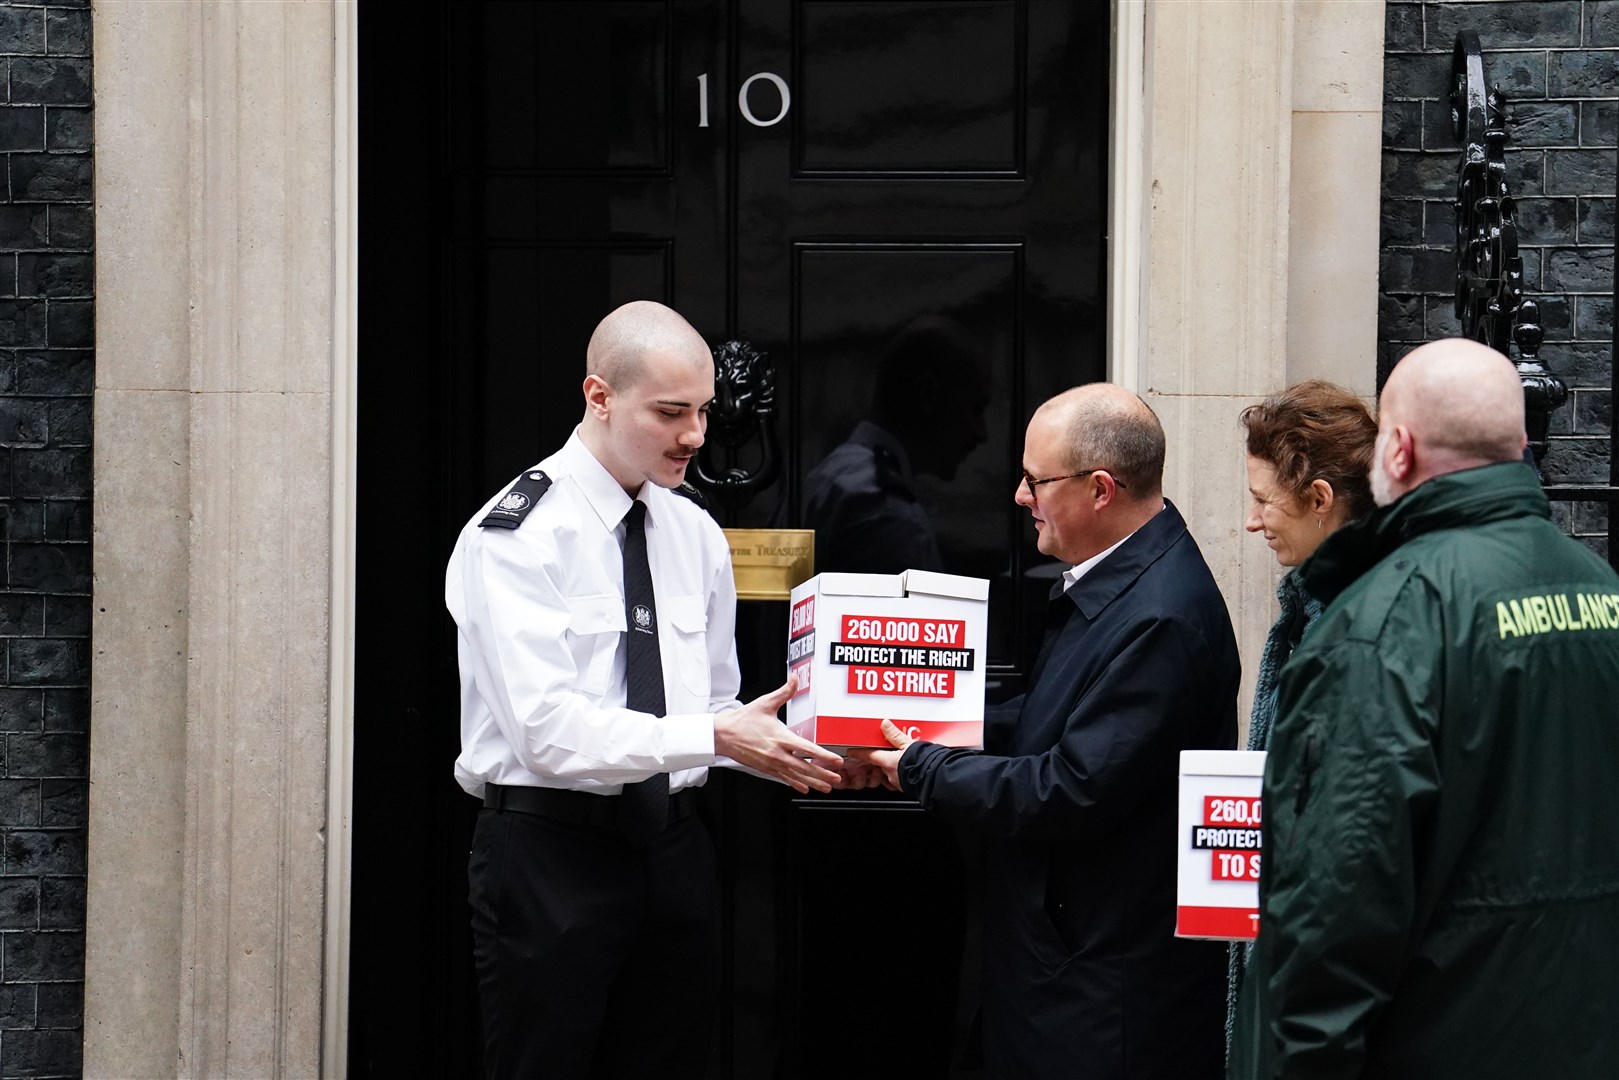 Paul Nowak, general secretary of the TUC, was joined by representatives of the Fire Brigades Union and the NHS Ambulance Service as they handed in a mass petition against the Government’s controversial plans for a new law on minimum service levels during strikes to 10 Downing Street (Jordan Pettitt/PA)